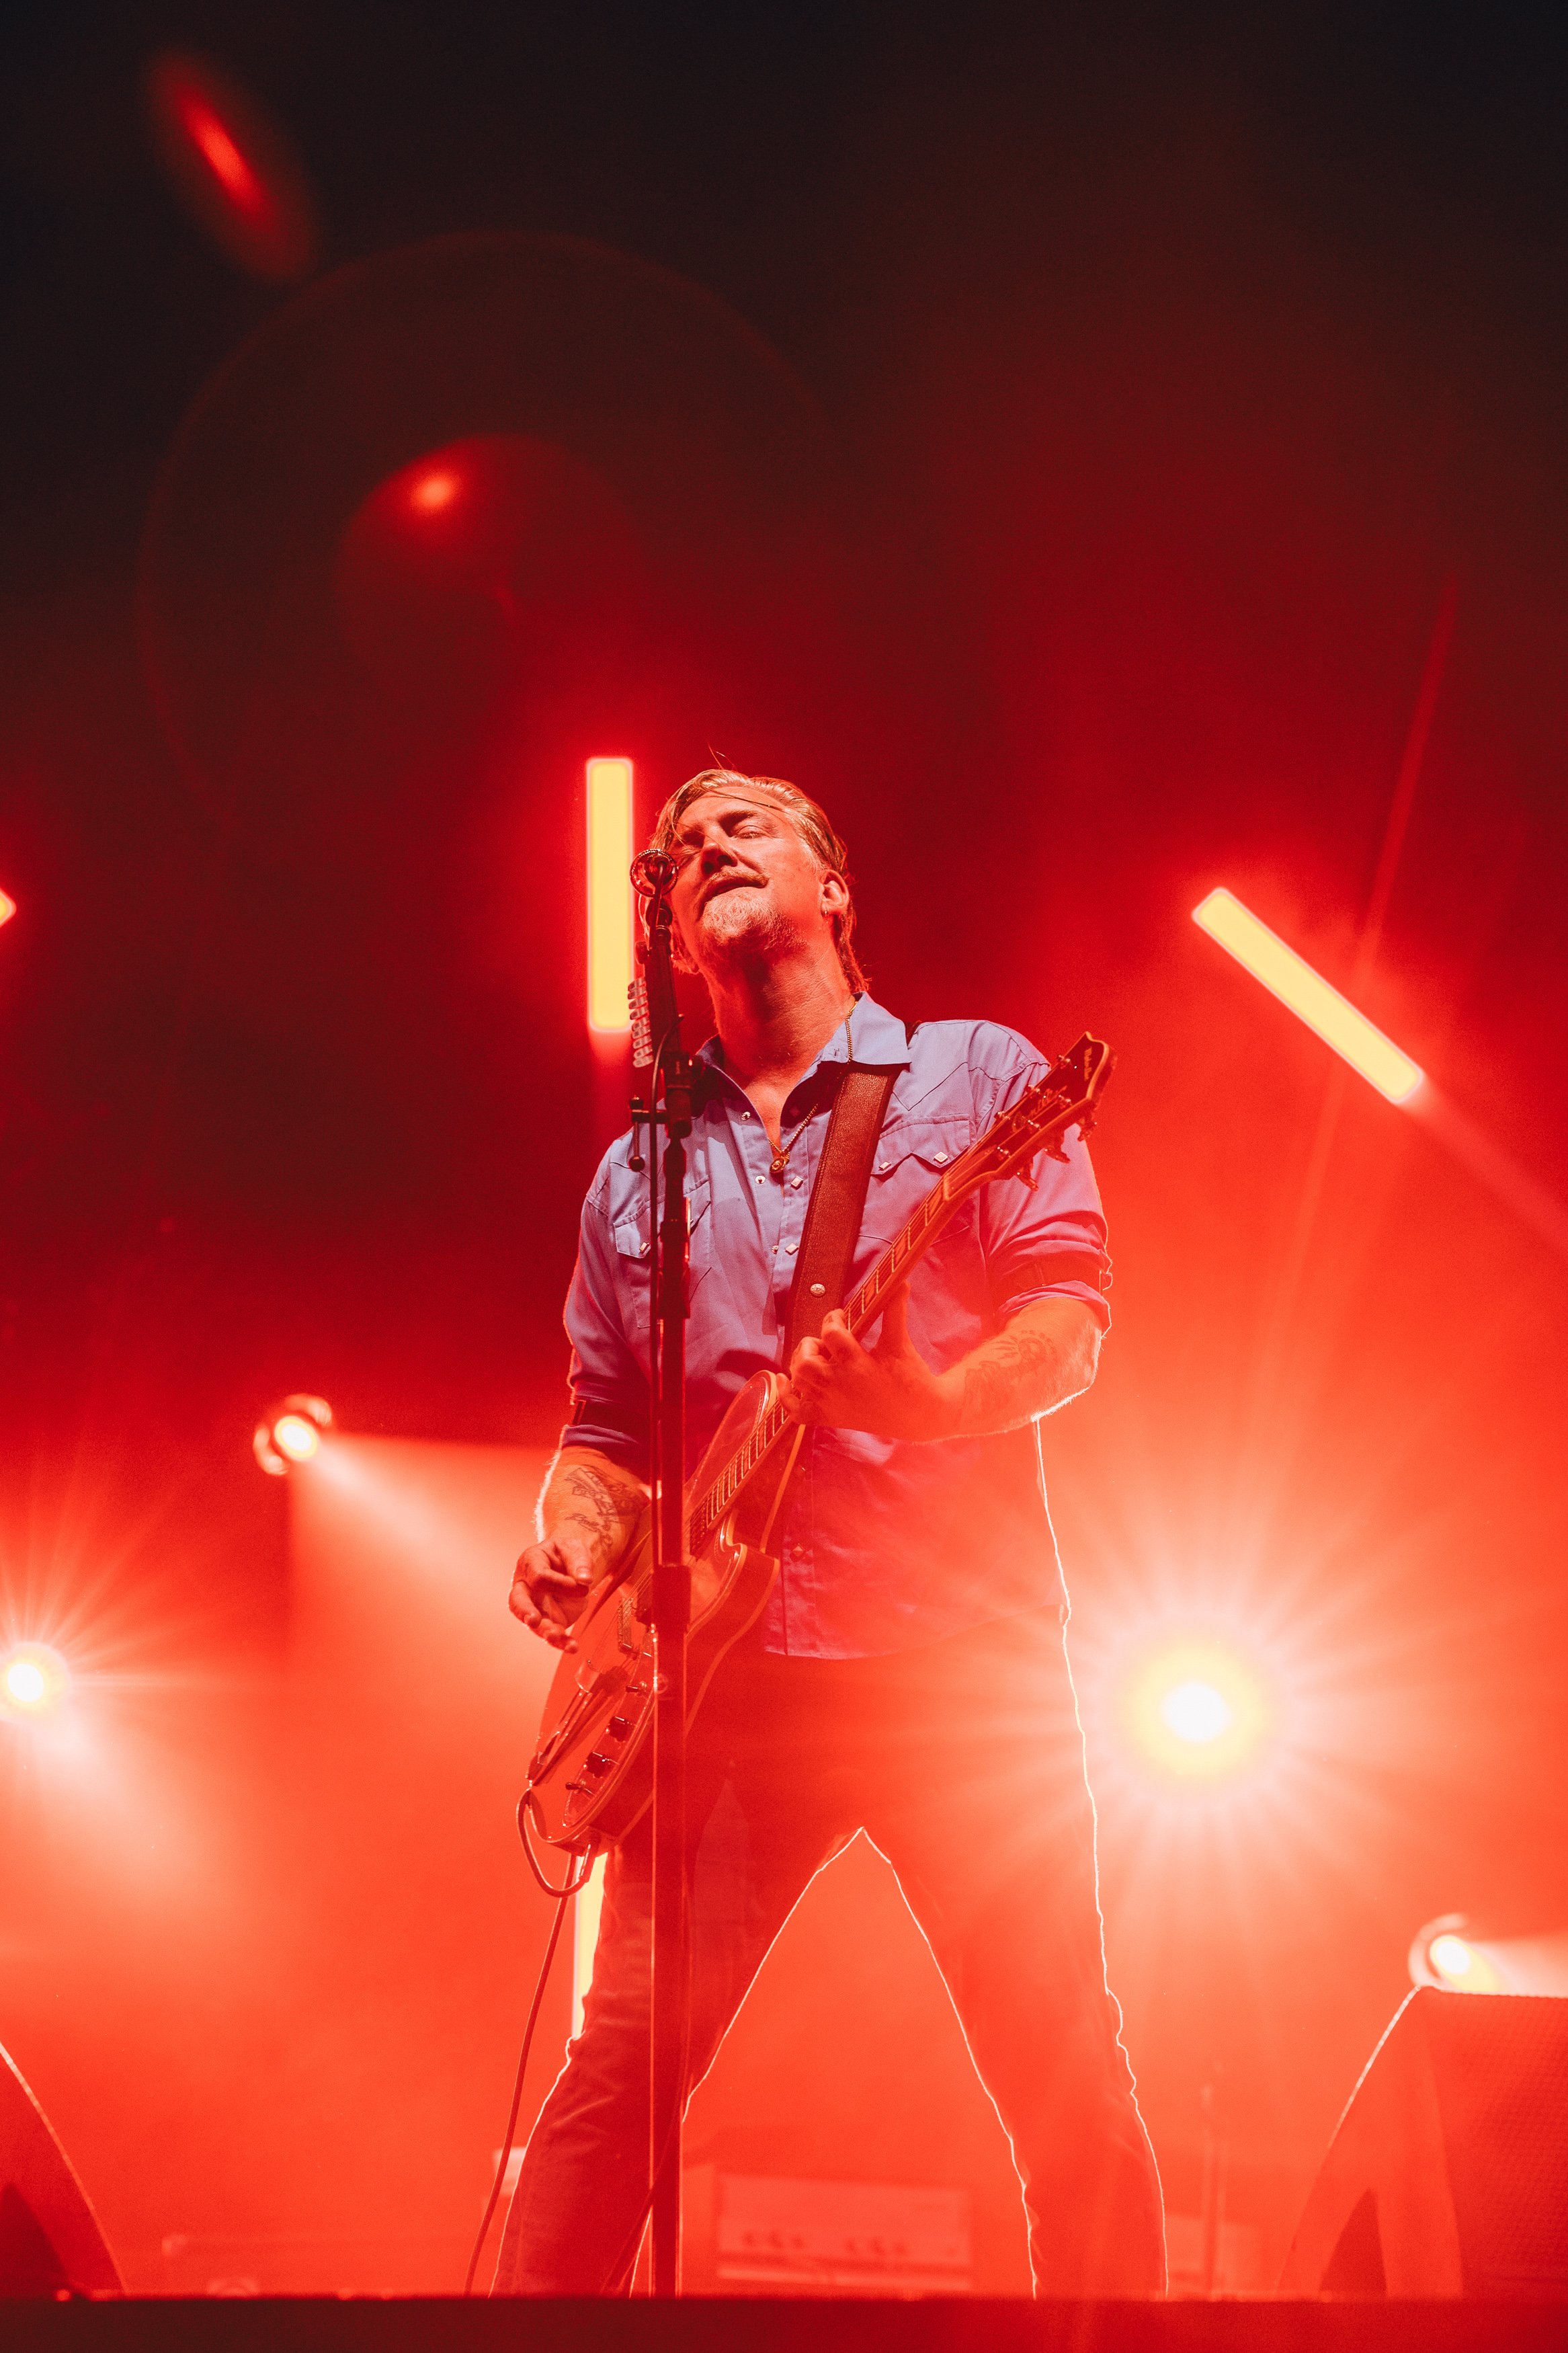 20230707_NOS_ALIVE_QUEENS_OF_THE_STONE_AGE_JOAOSILVAGD_08591.jpg